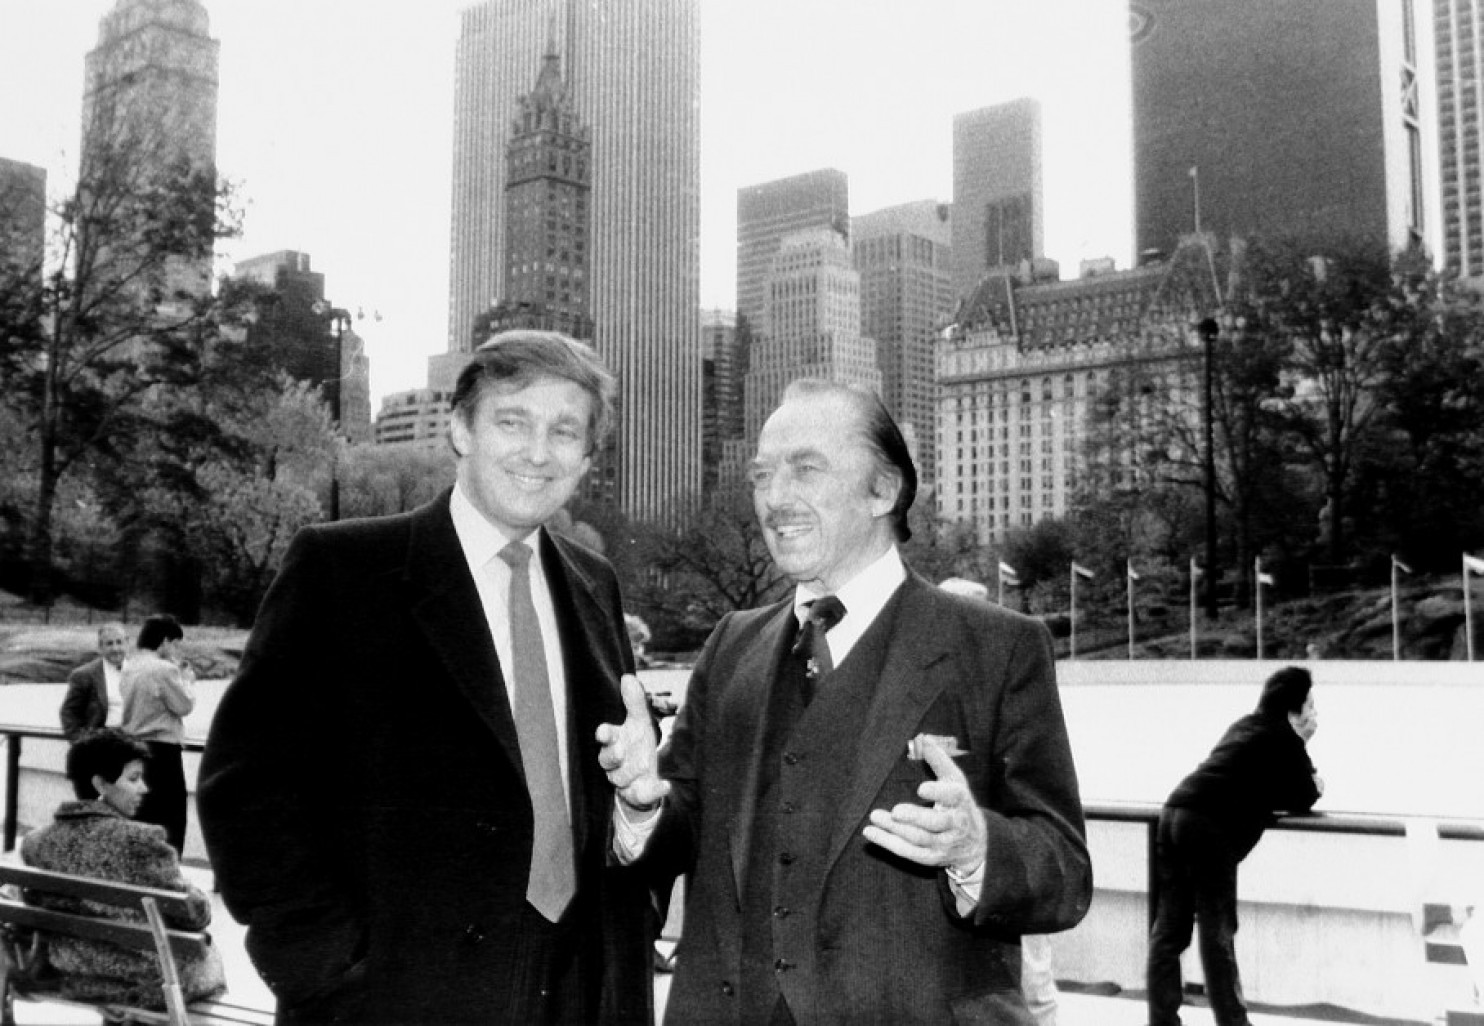 donald and fred trump